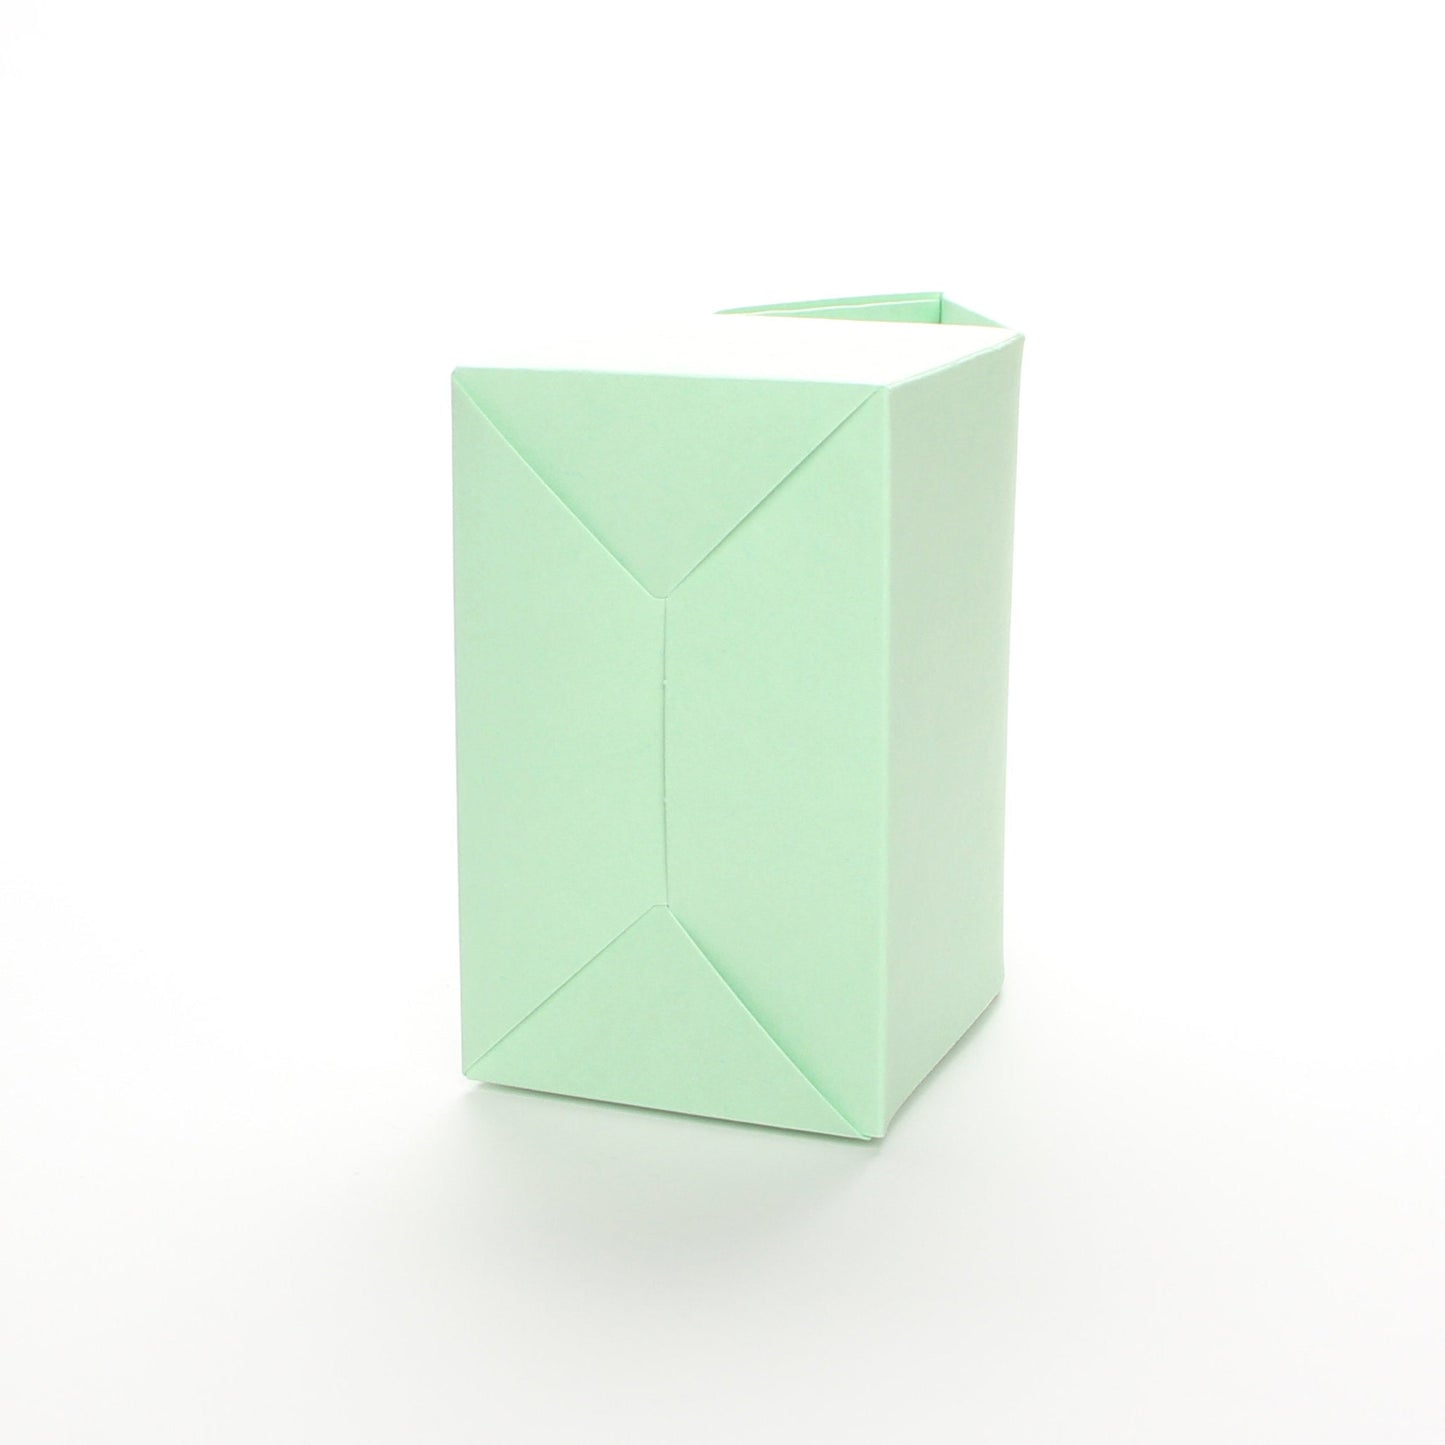 Bottom view of Lux Party’s mint green favor box on a white background.